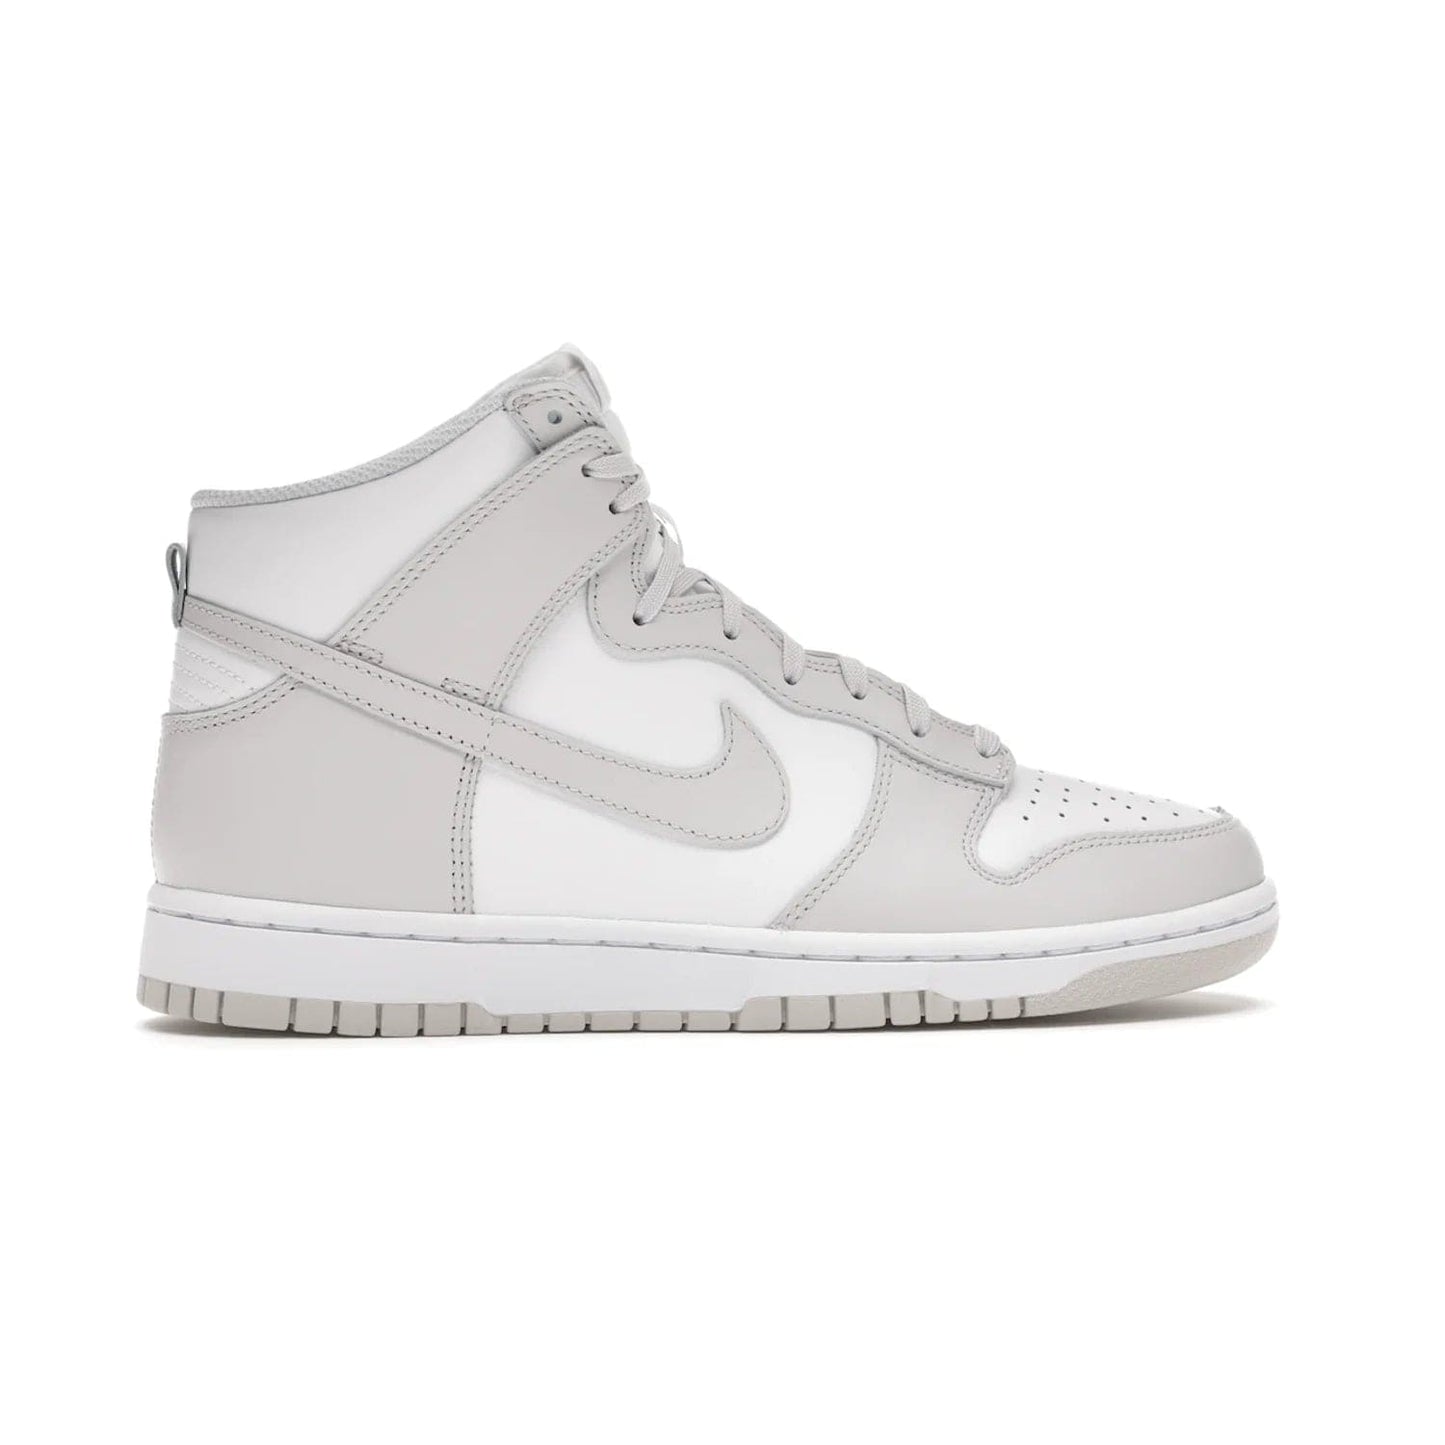 Nike Dunk High Retro White Vast Grey (2021) - Image 36 - Only at www.BallersClubKickz.com - Nike Dunk High Retro White Vast Grey 2021: classic '80s basketball sneaker with a crisp white base, grey overlays, midsole tooling and outsole. Dropped Feb. 2021.